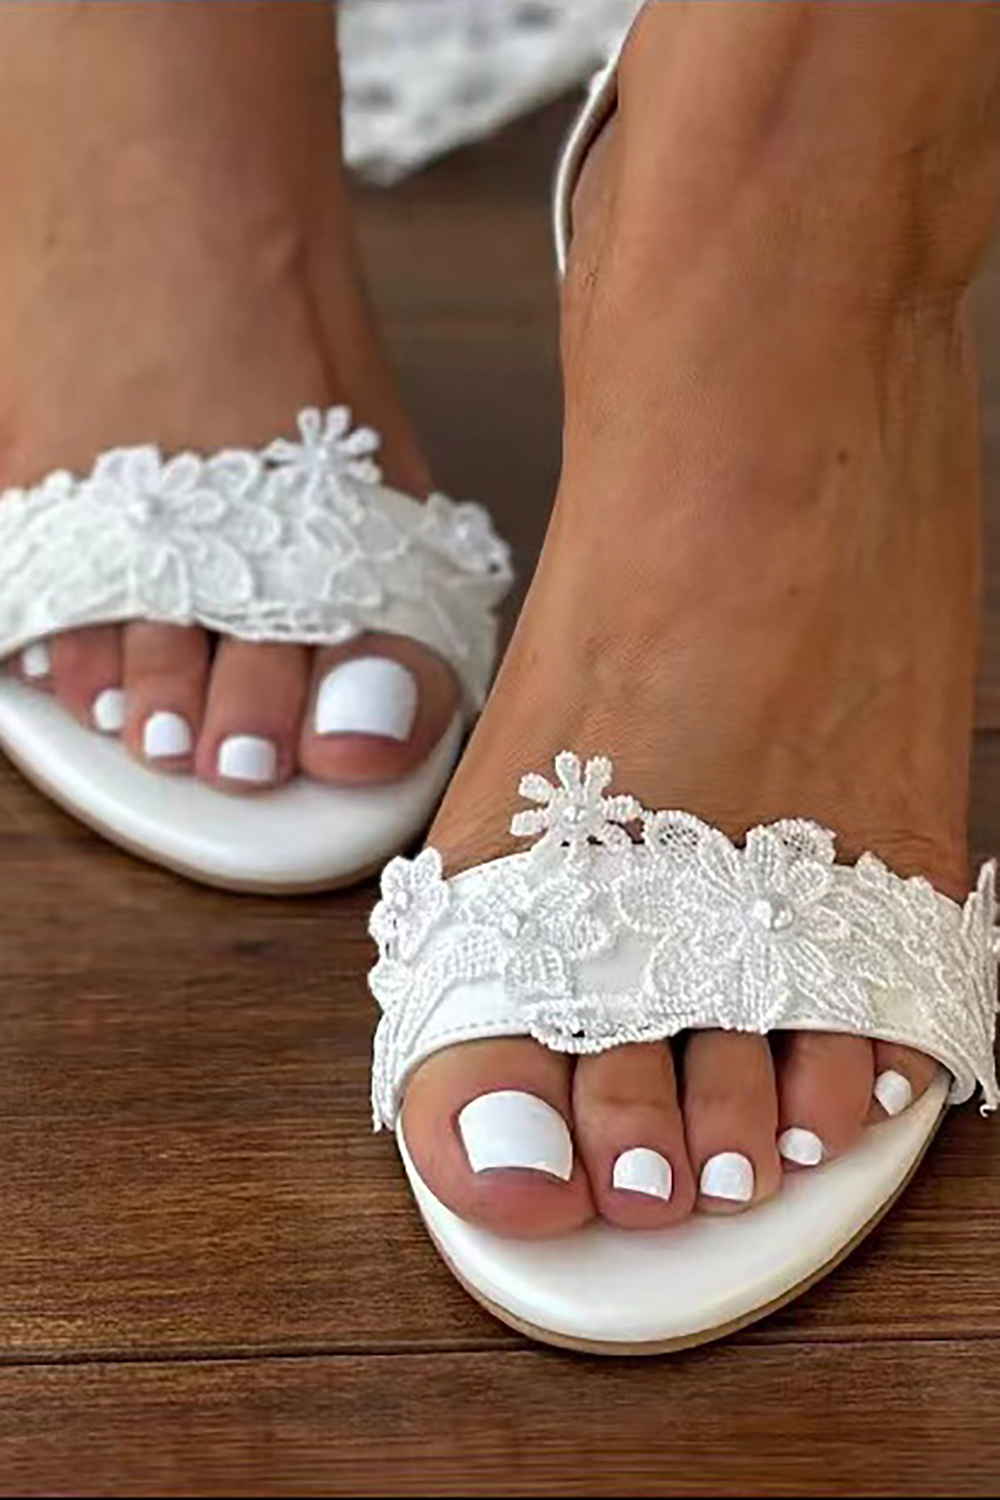 White Chunky High Heels With Lace For Weddings